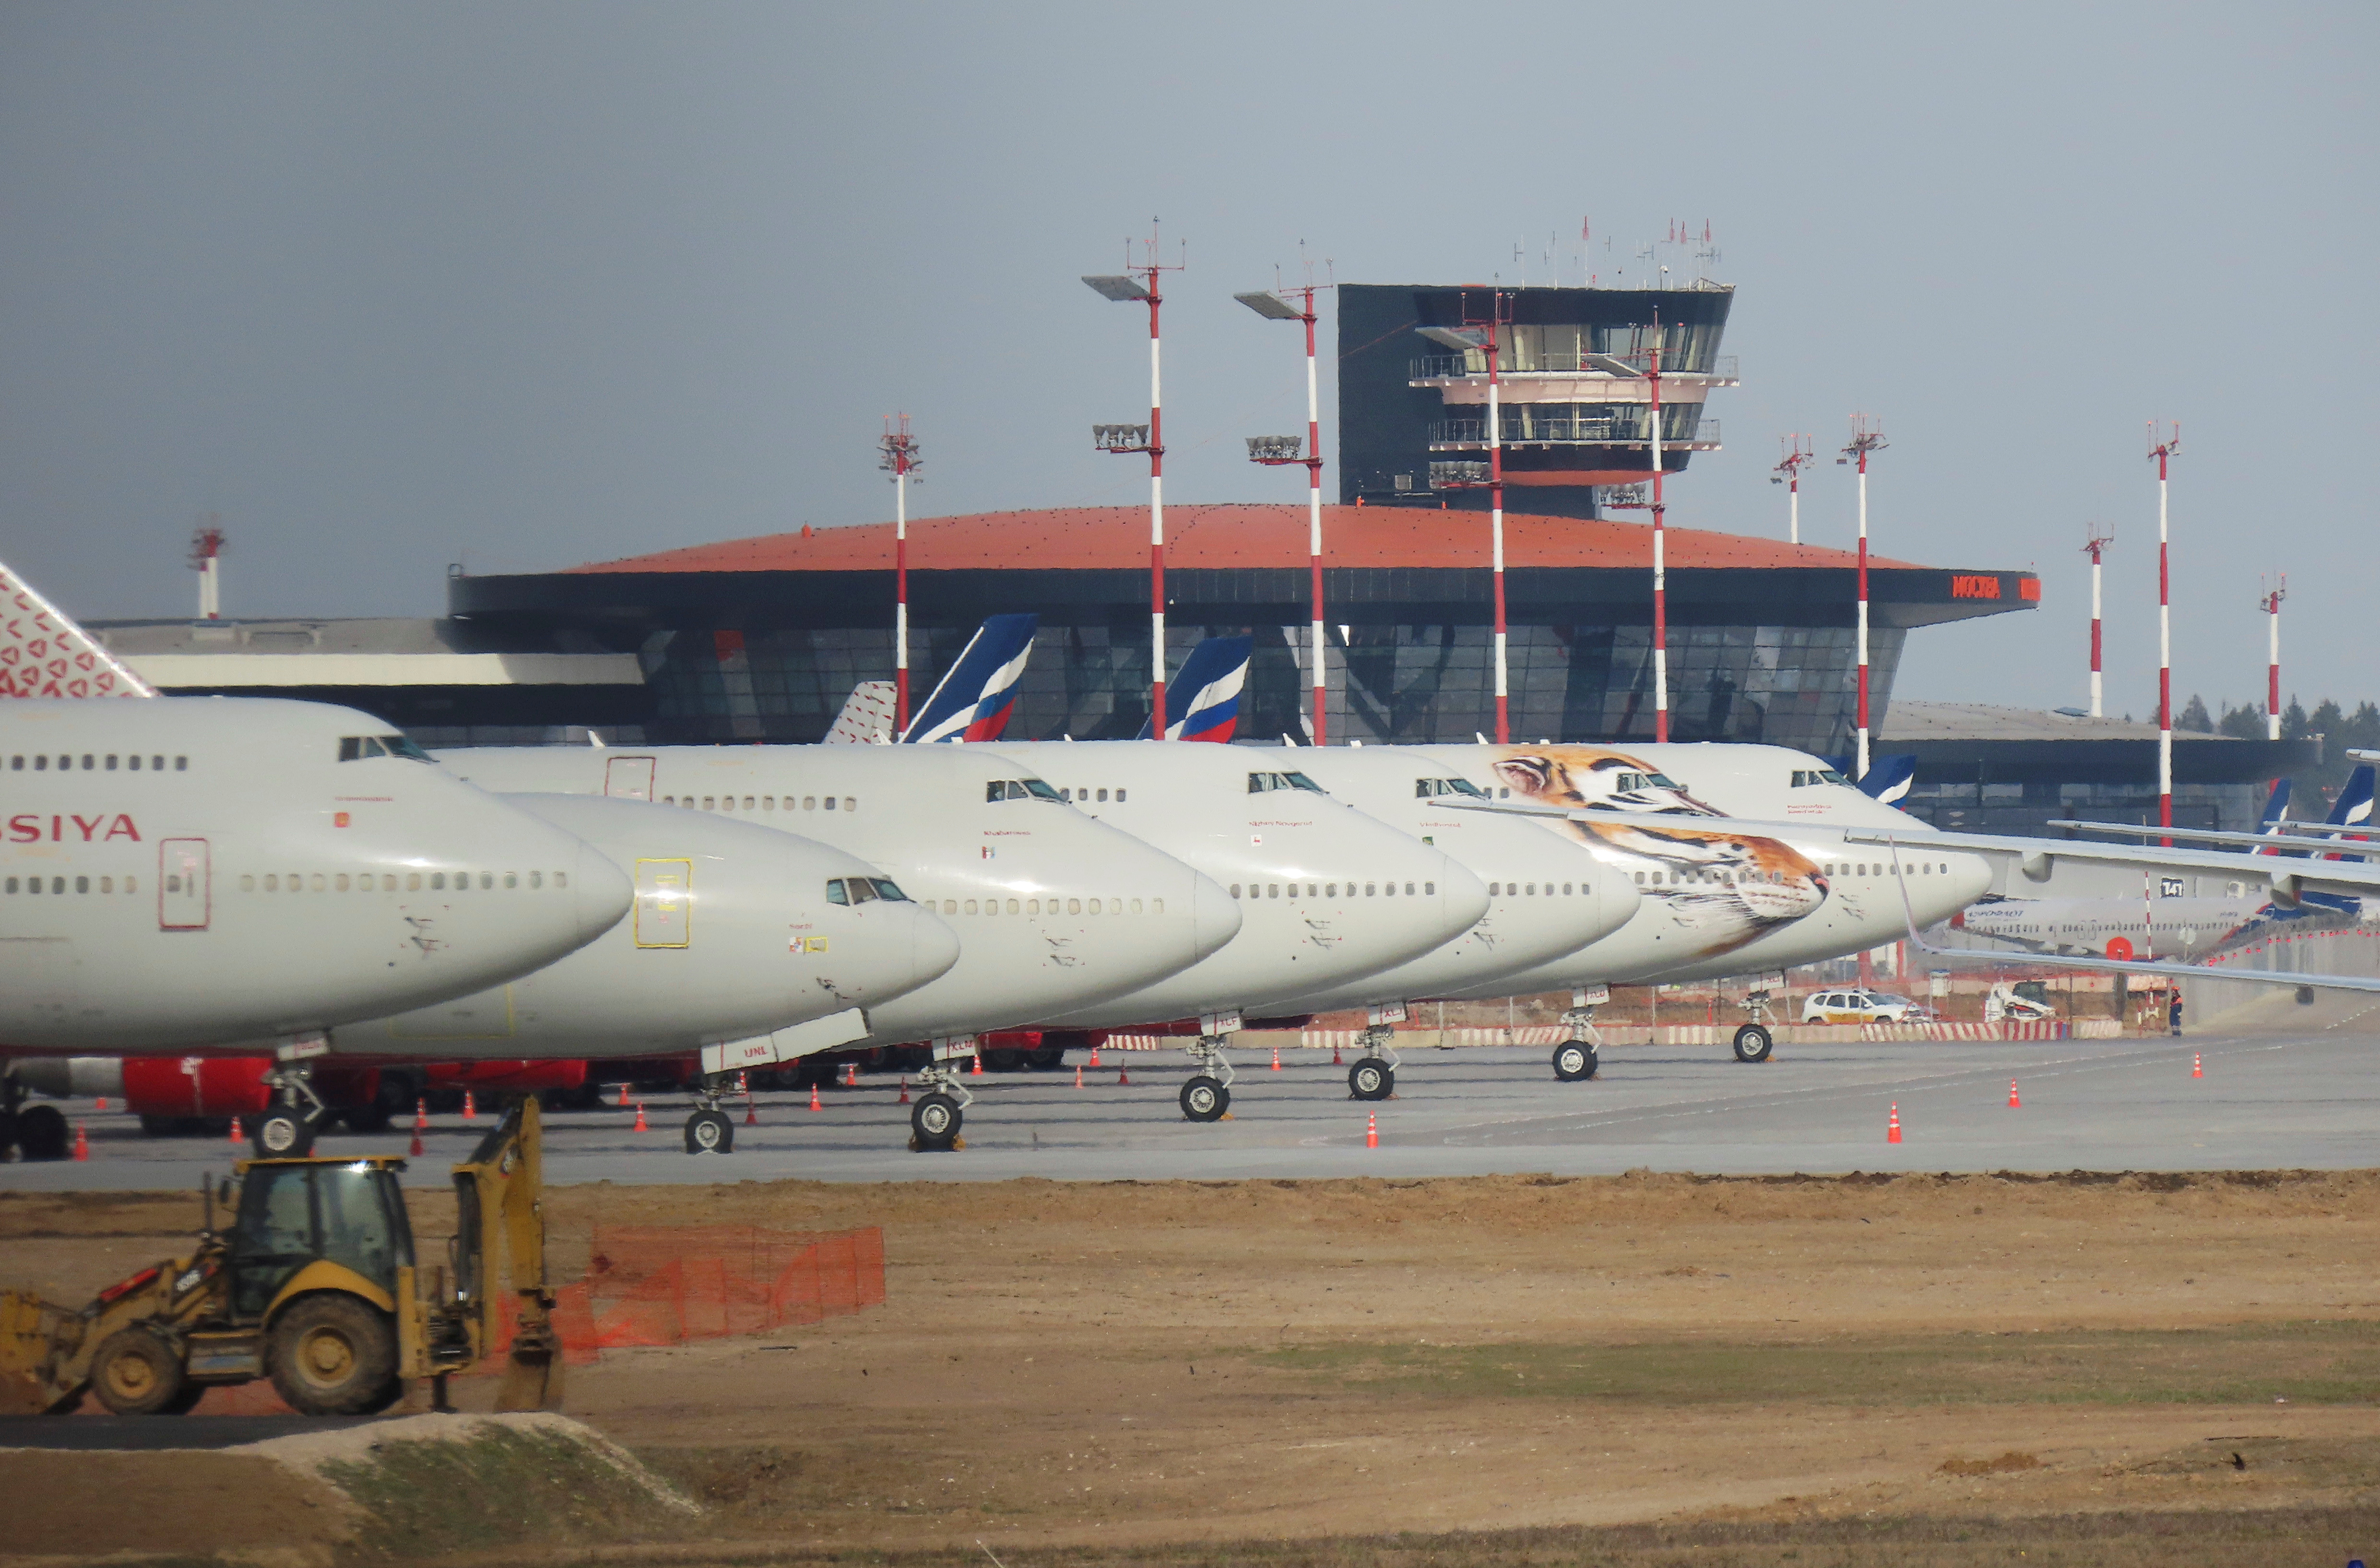 Planes are seen parked at Sheremetyevo International Airport outside Moscow